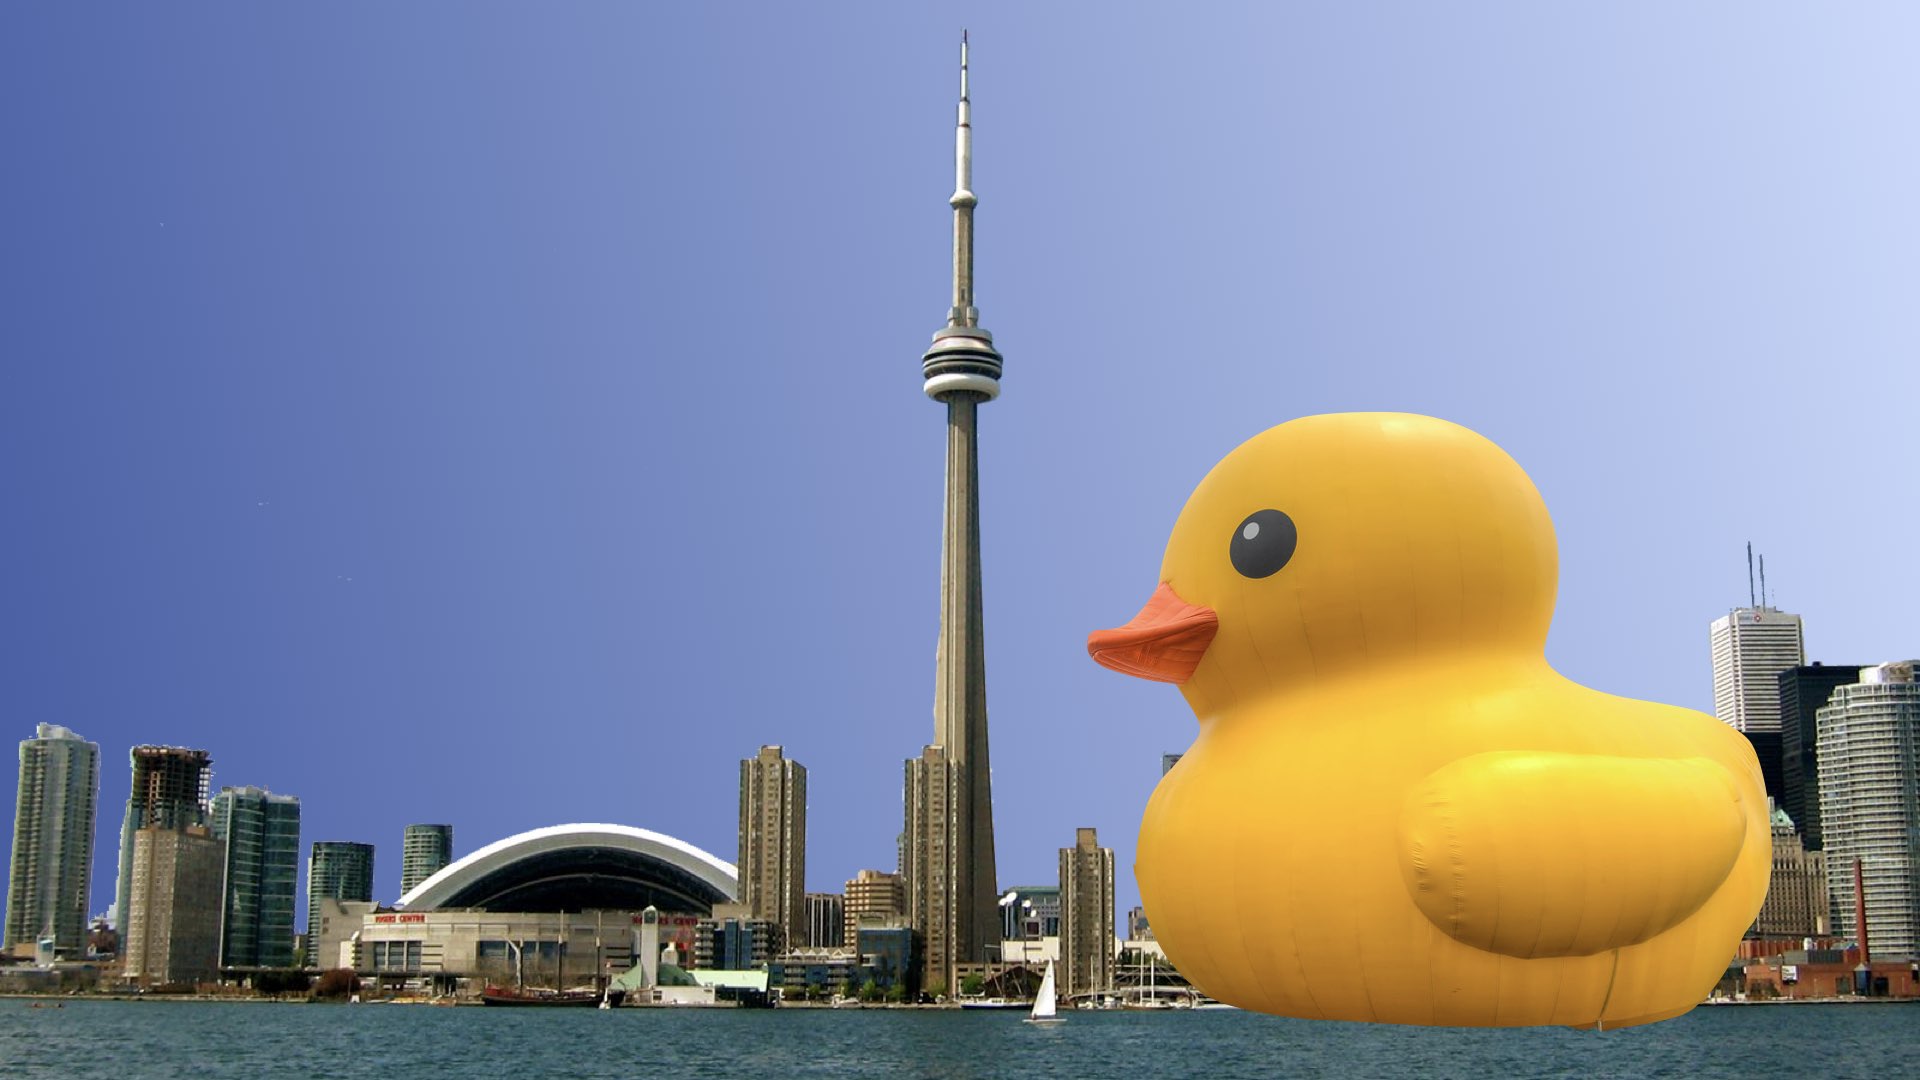 Giant Rubber Duck vs. CN Tower 3 Act Math